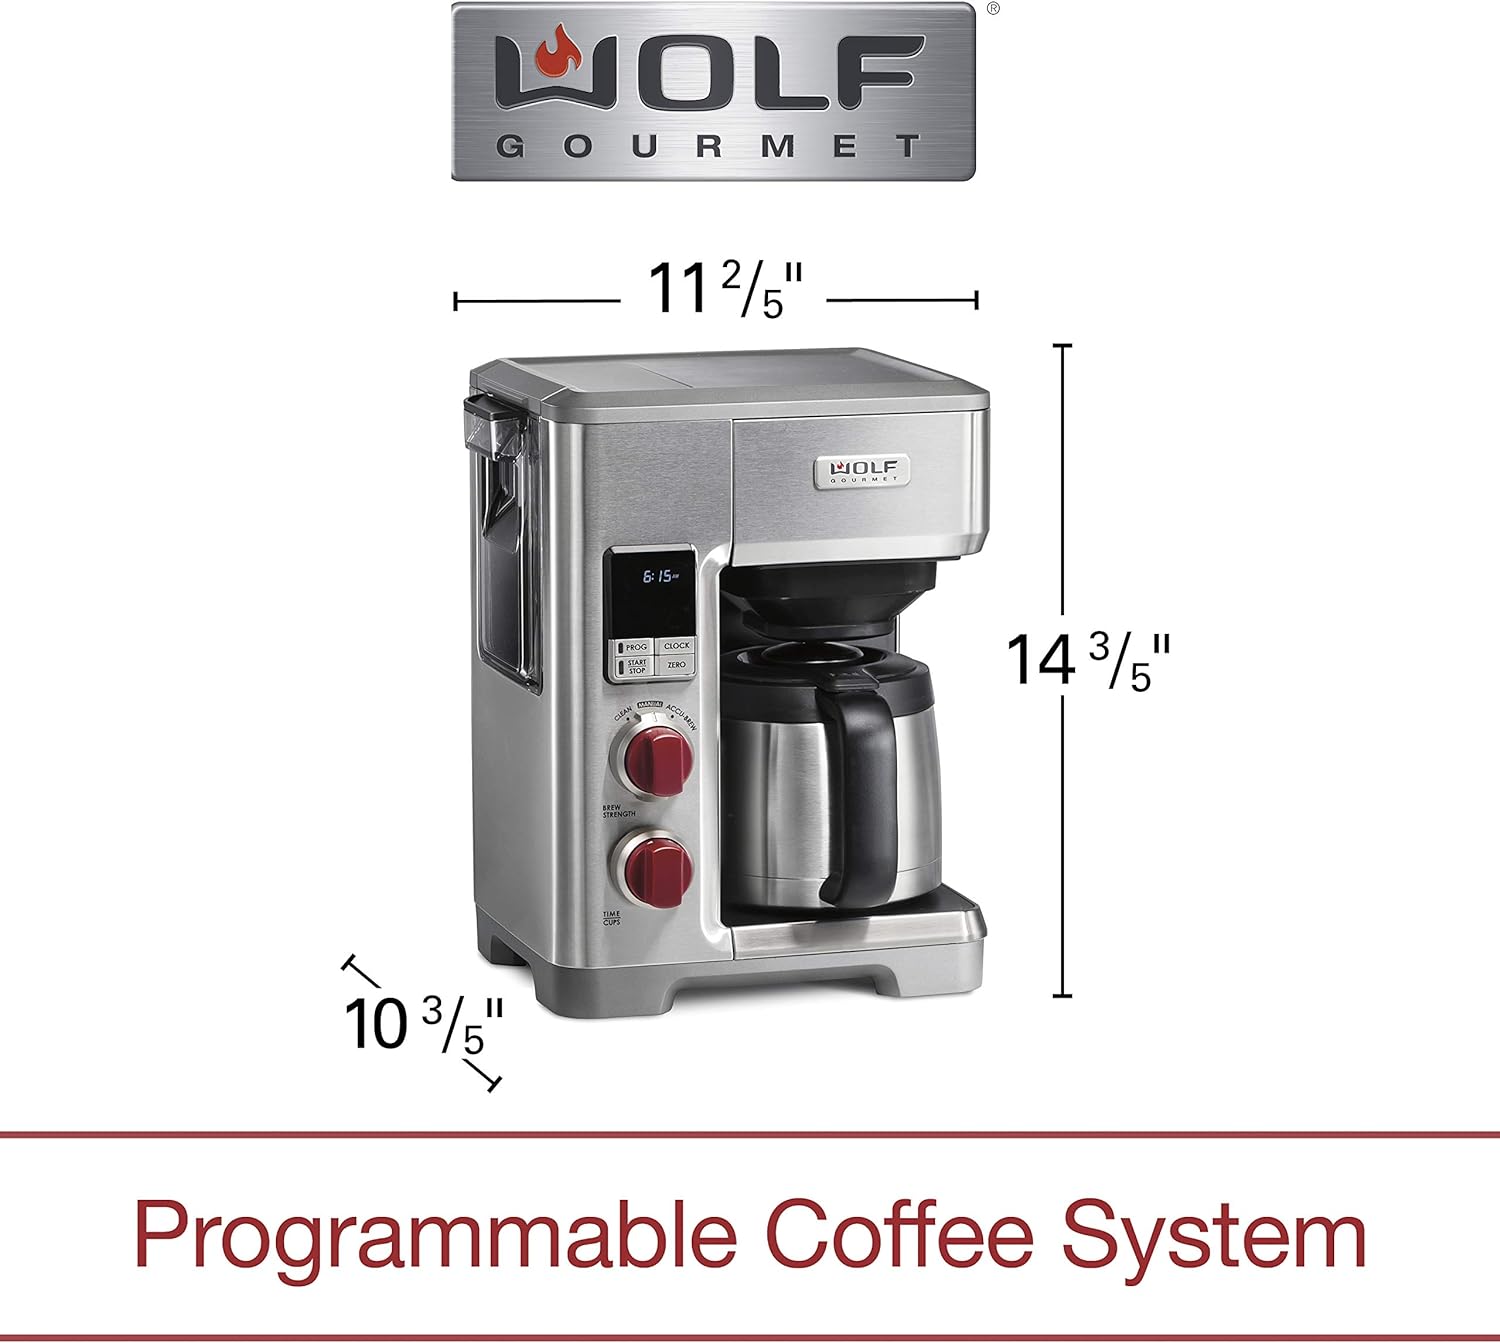 WOLF GOURMET Coffee Maker Review